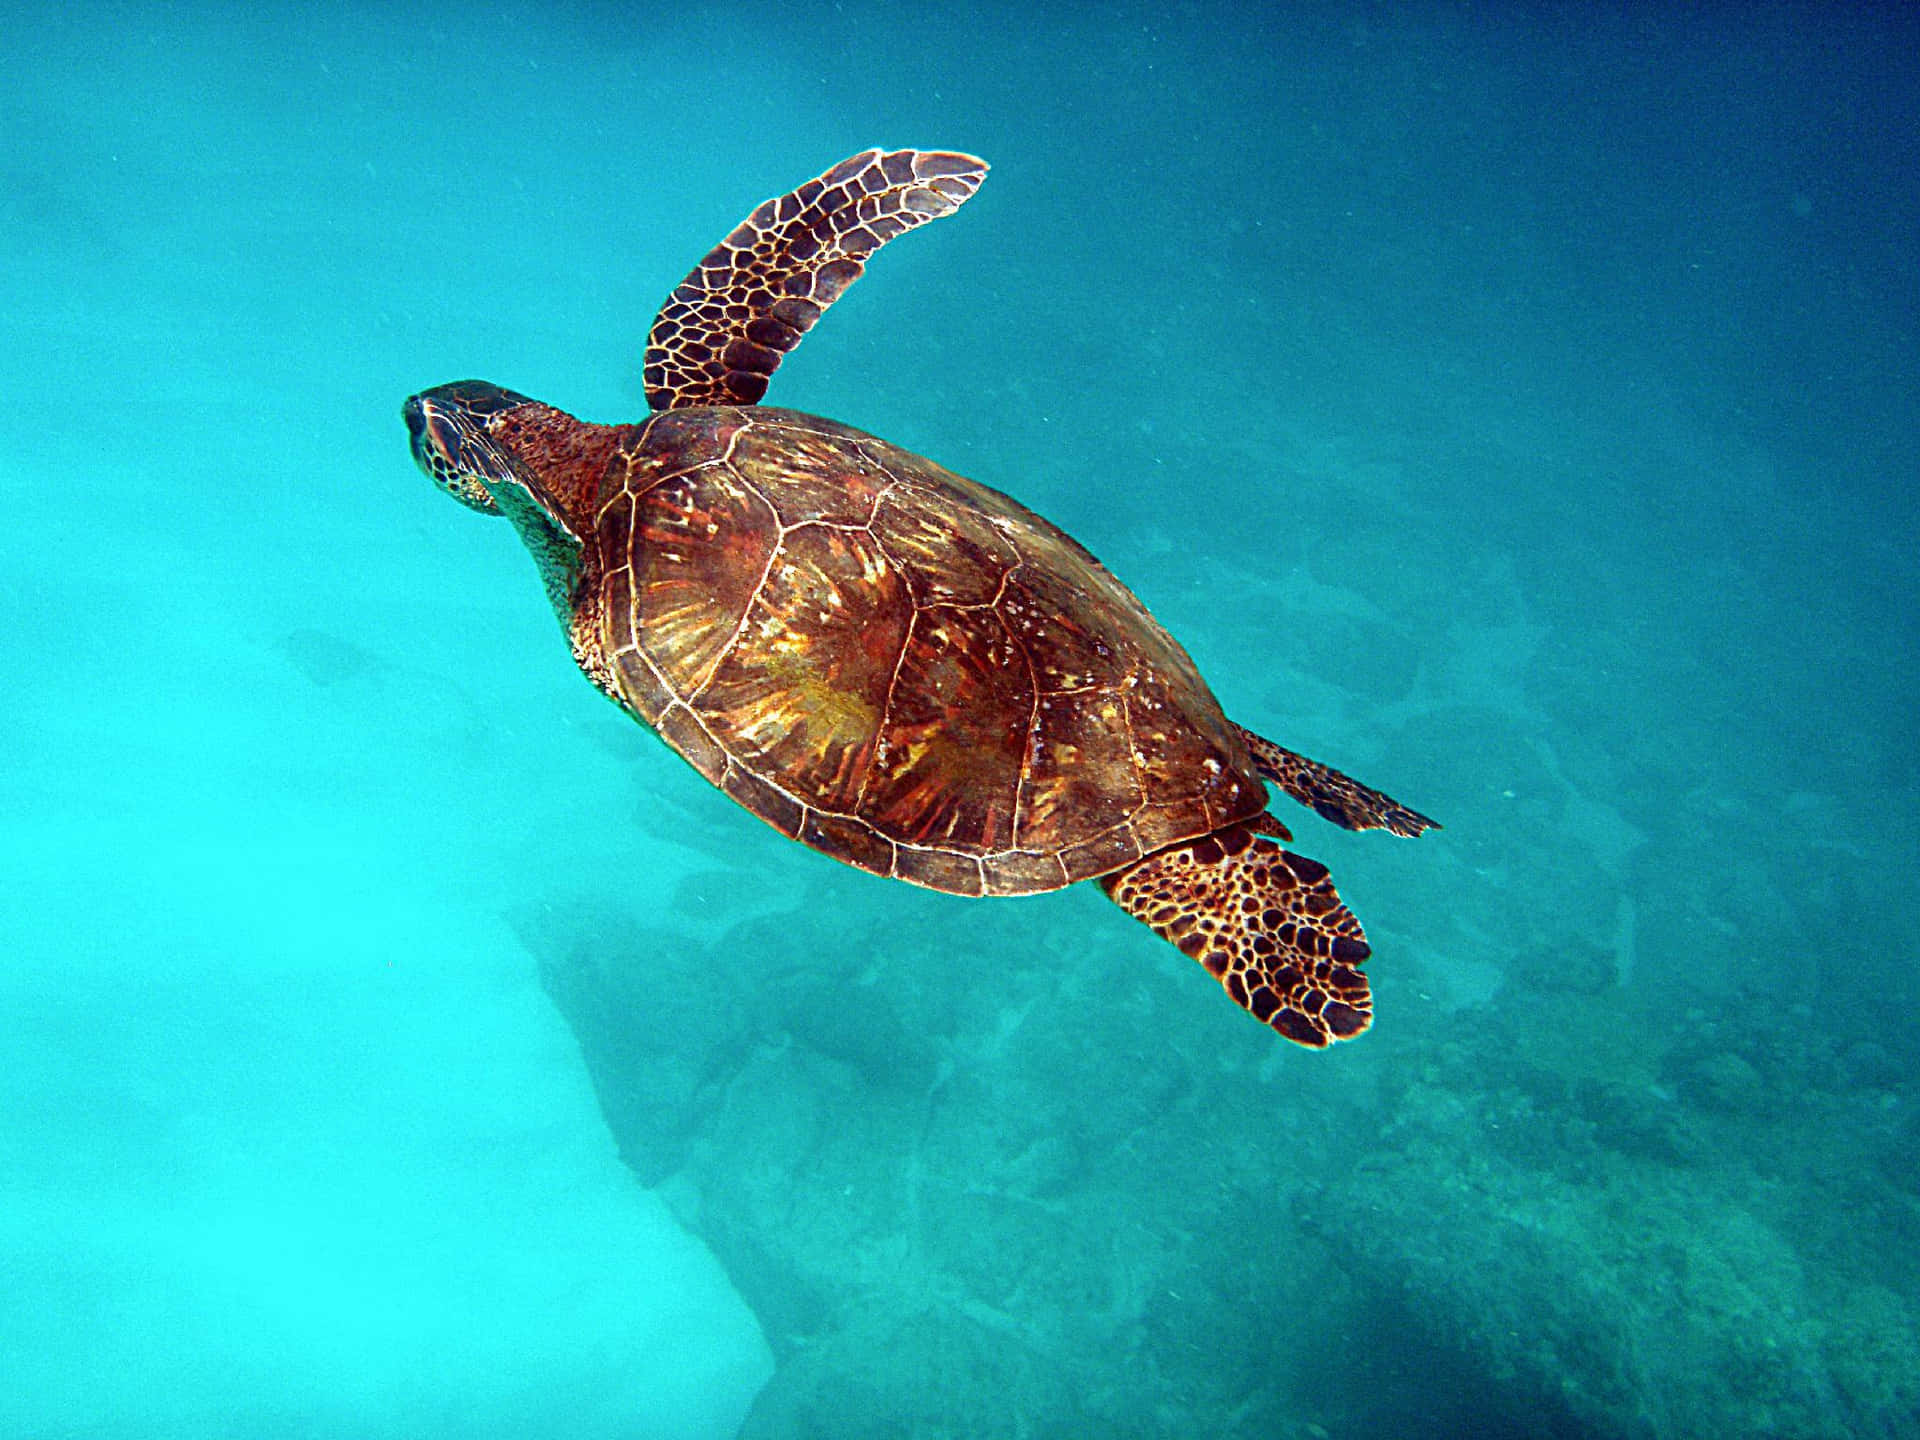 A Turtle Swimming In The Ocean